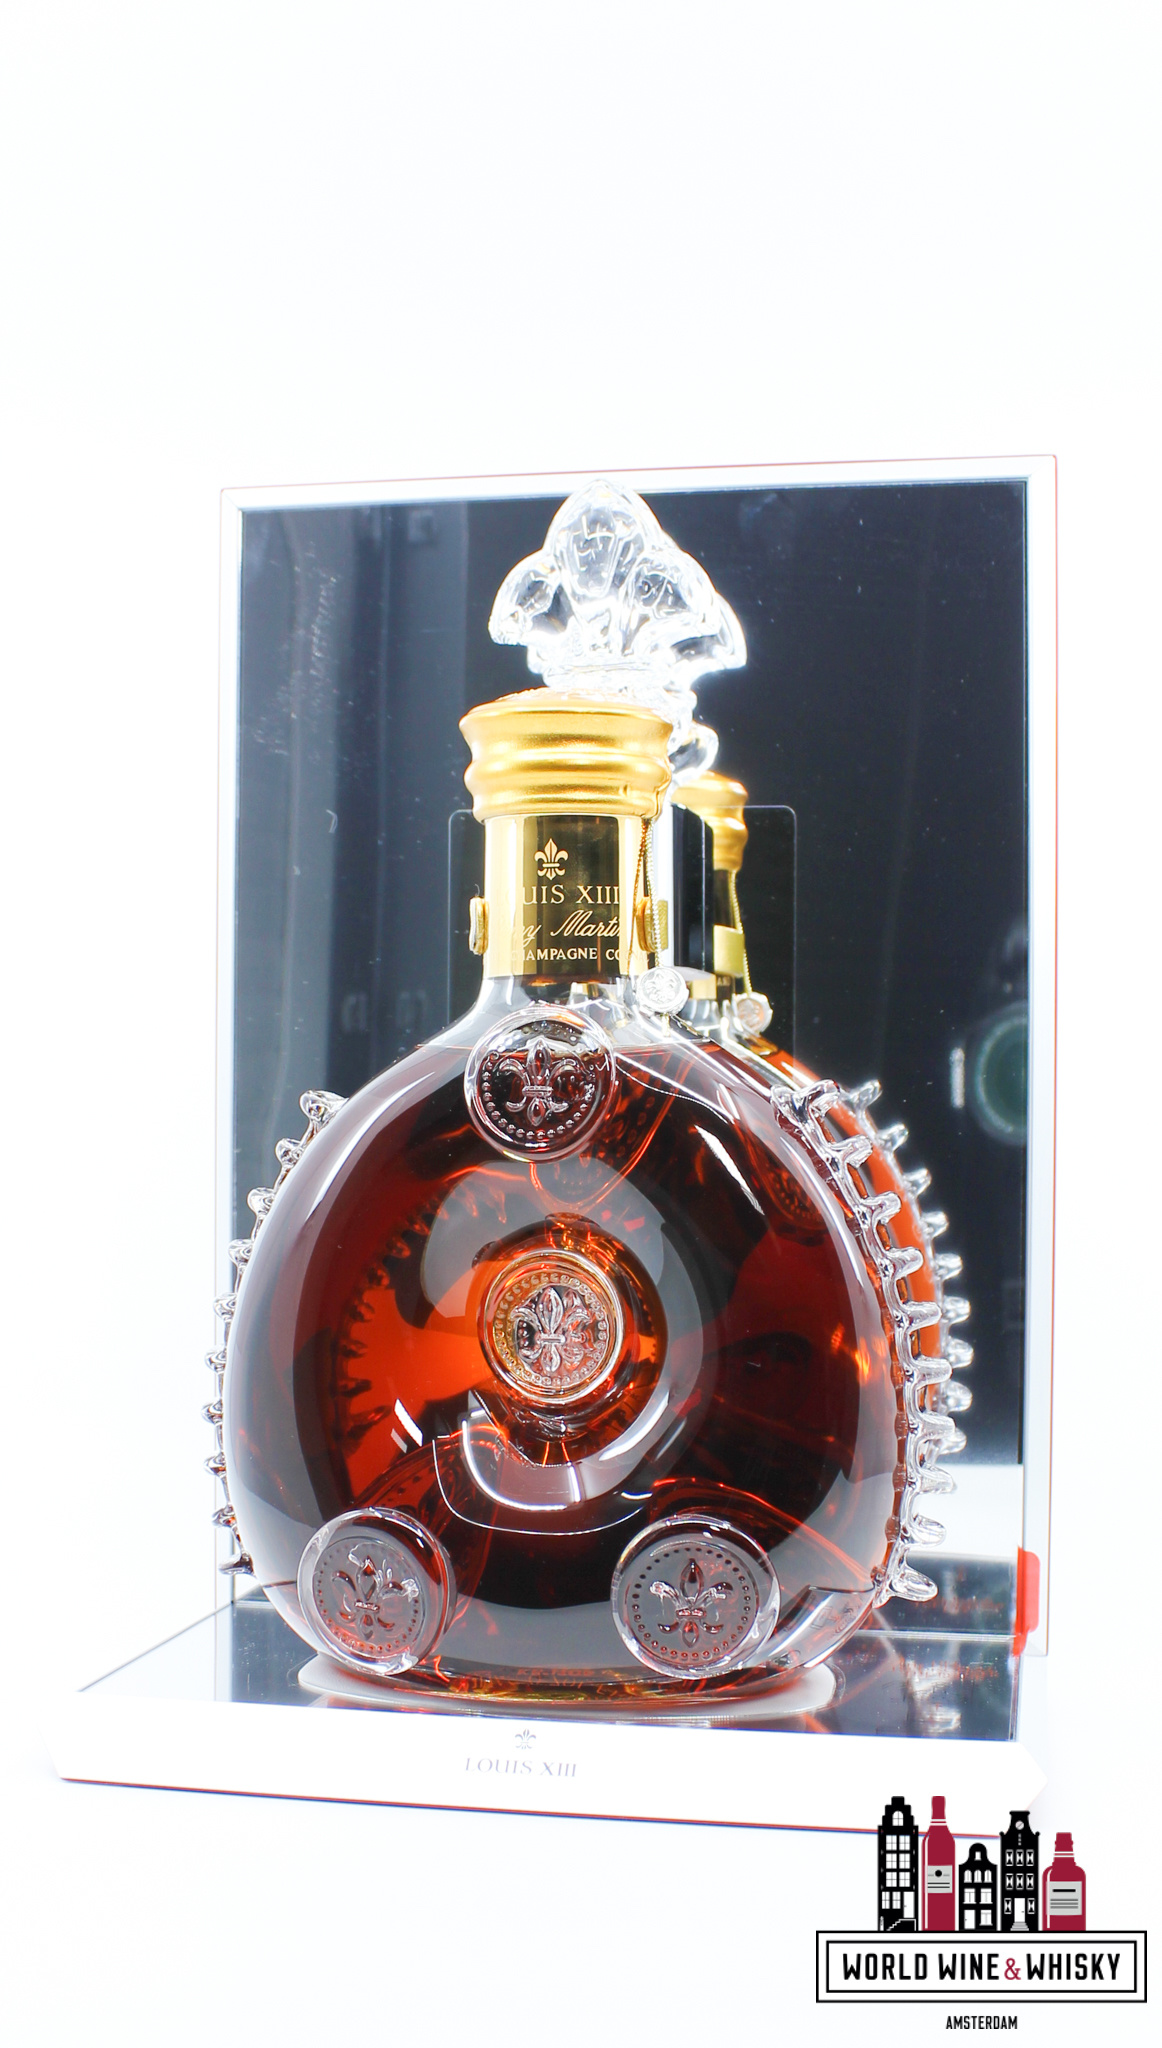 Remy Martin Louis XIII Grand Champagne Cognac Baccarat Bottle